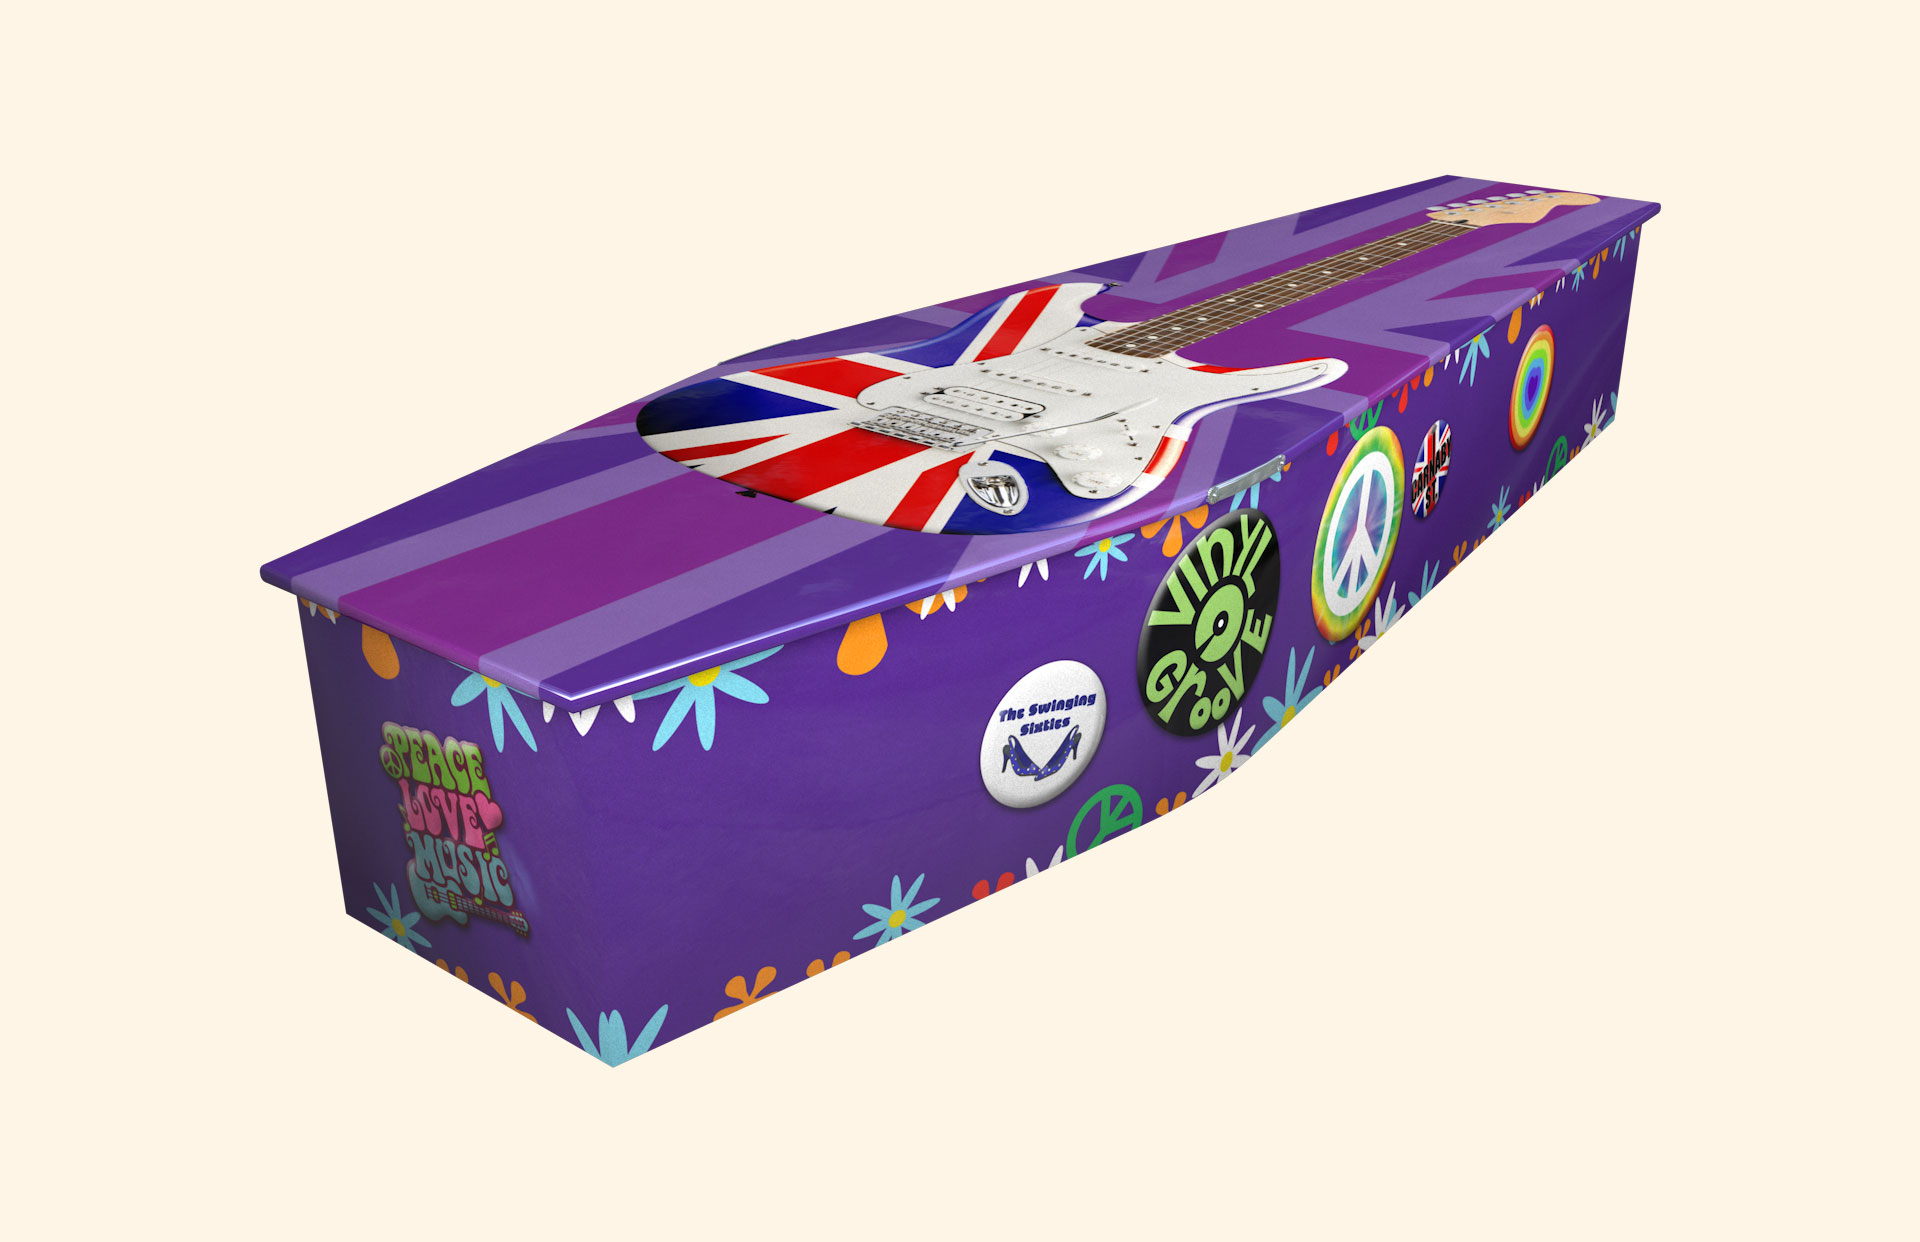 Swinging 60s design on a traditional coffin